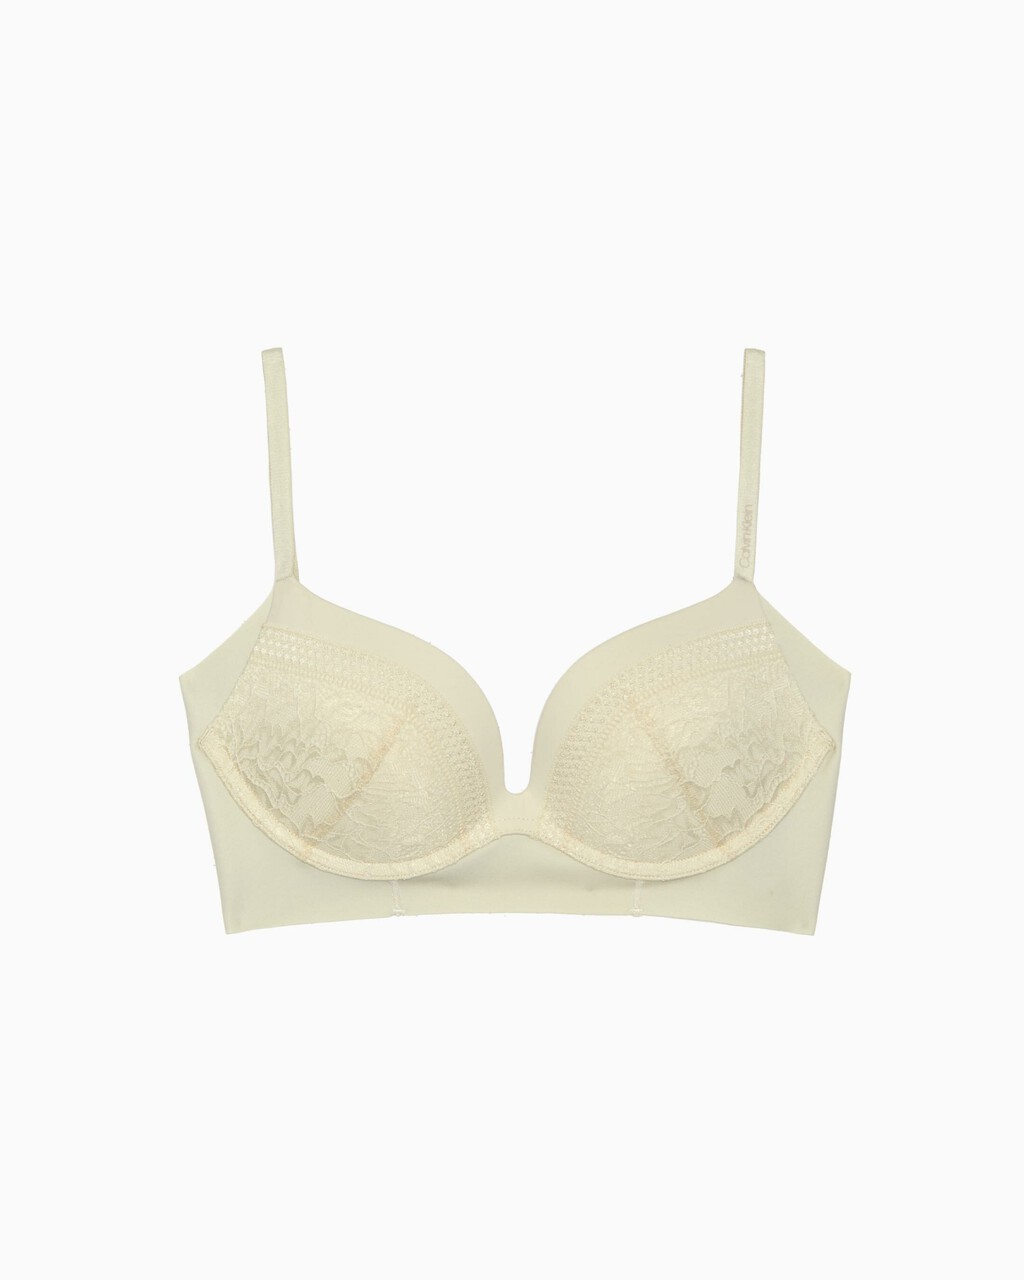 CALVIN KLEIN Perfectly Fit Plunge Push Up Nude Beige Bra QF1120